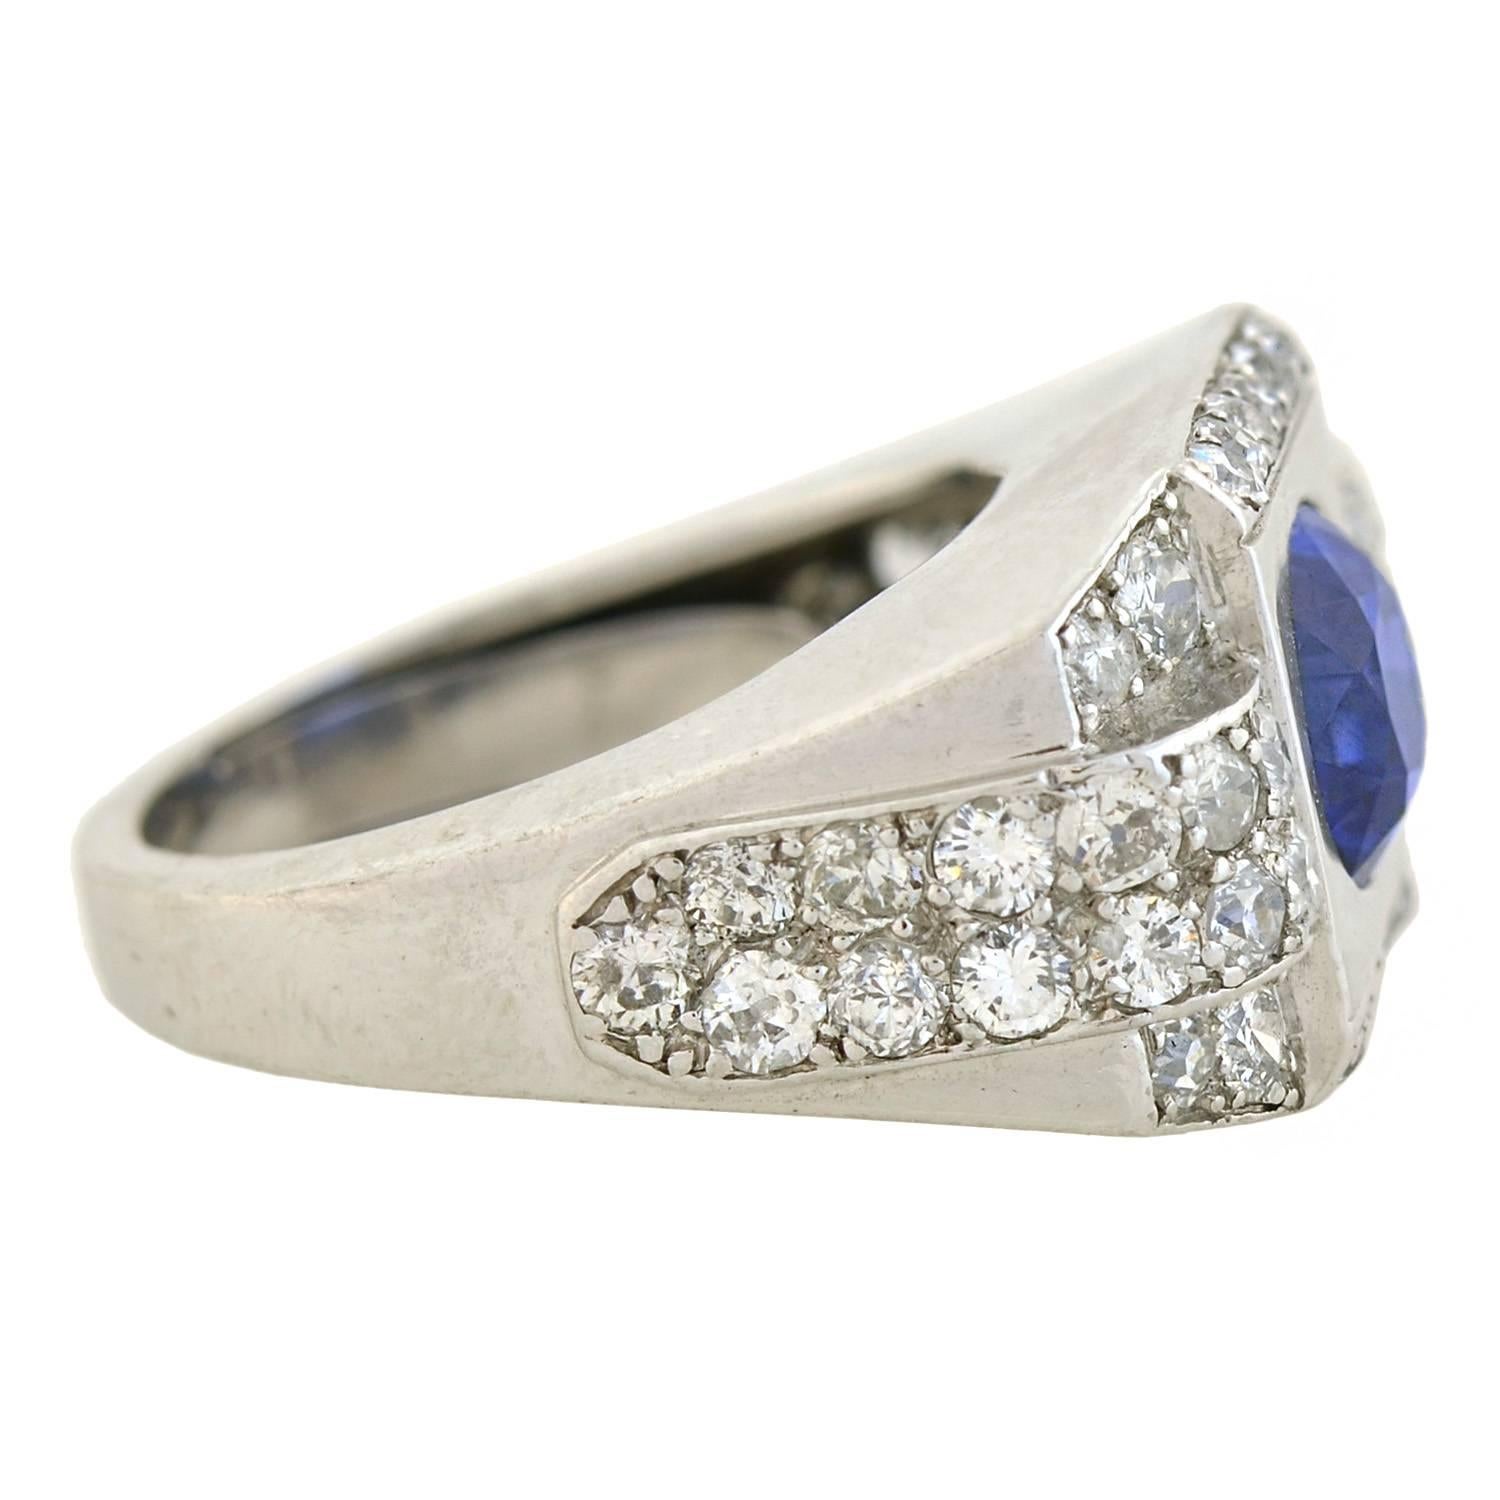 An absolutely fantastic natural sapphire and diamond ring from the late Art Deco (ca1930s) era! The ring, which is crafted in platinum and French in origin, displays a natural sapphire set within a bold and striking mounting. The natural Ceylon (Sri